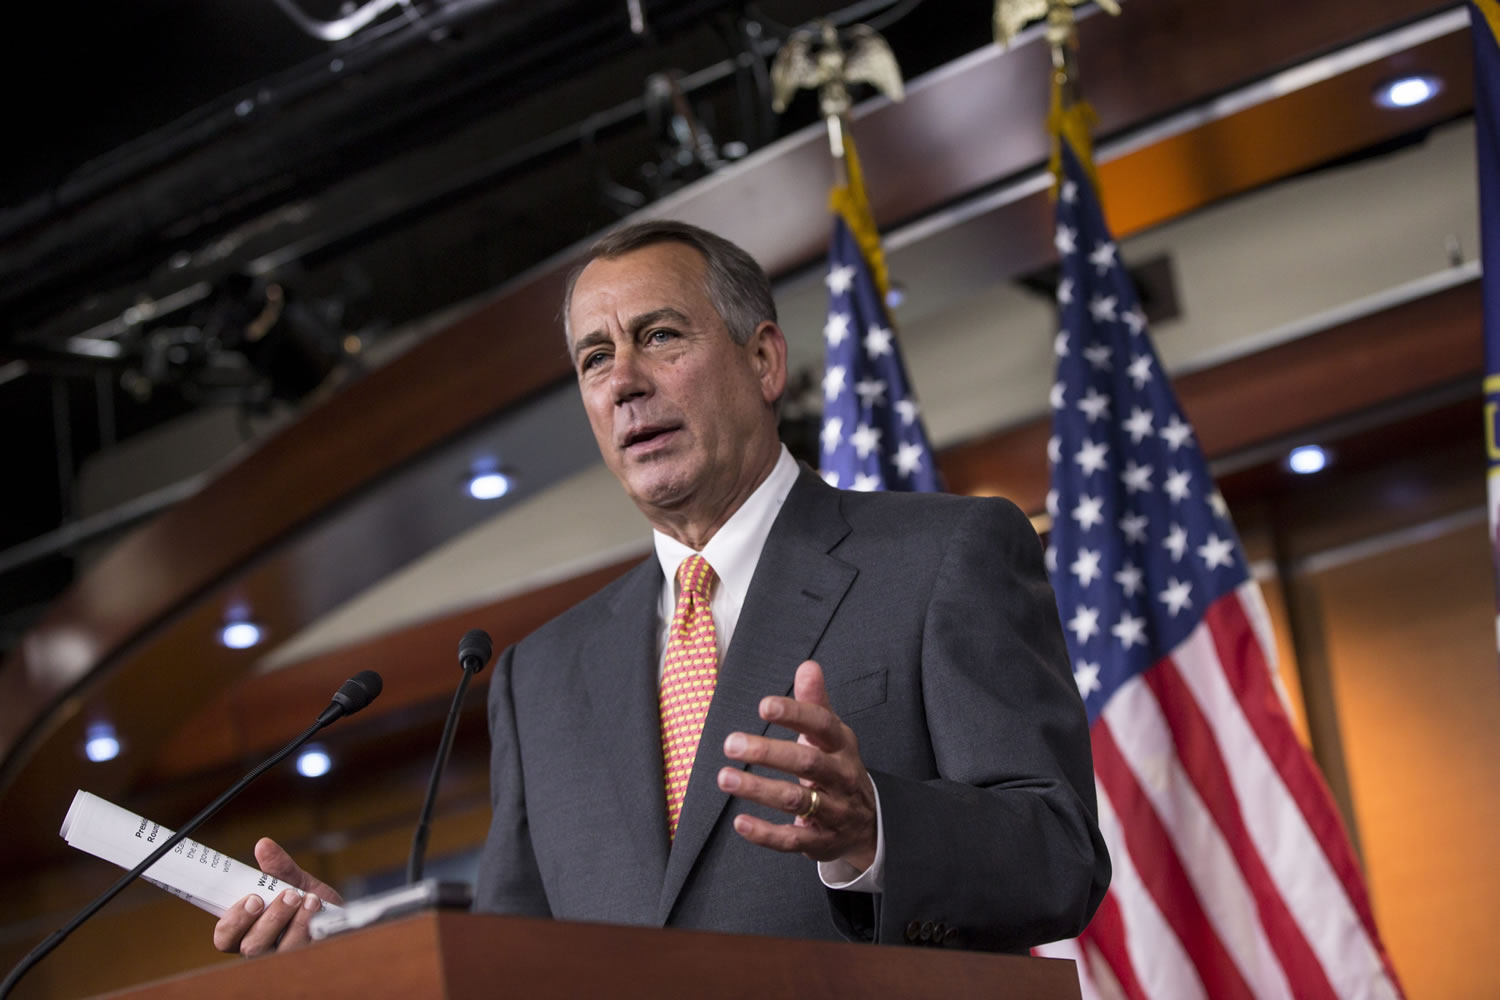 Speaker of the House John Boehner, R-Ohio, talks to reporters about the deadline to fund the government and the fight among House Republicans, on Capitol Hill in Washington on Thursday.